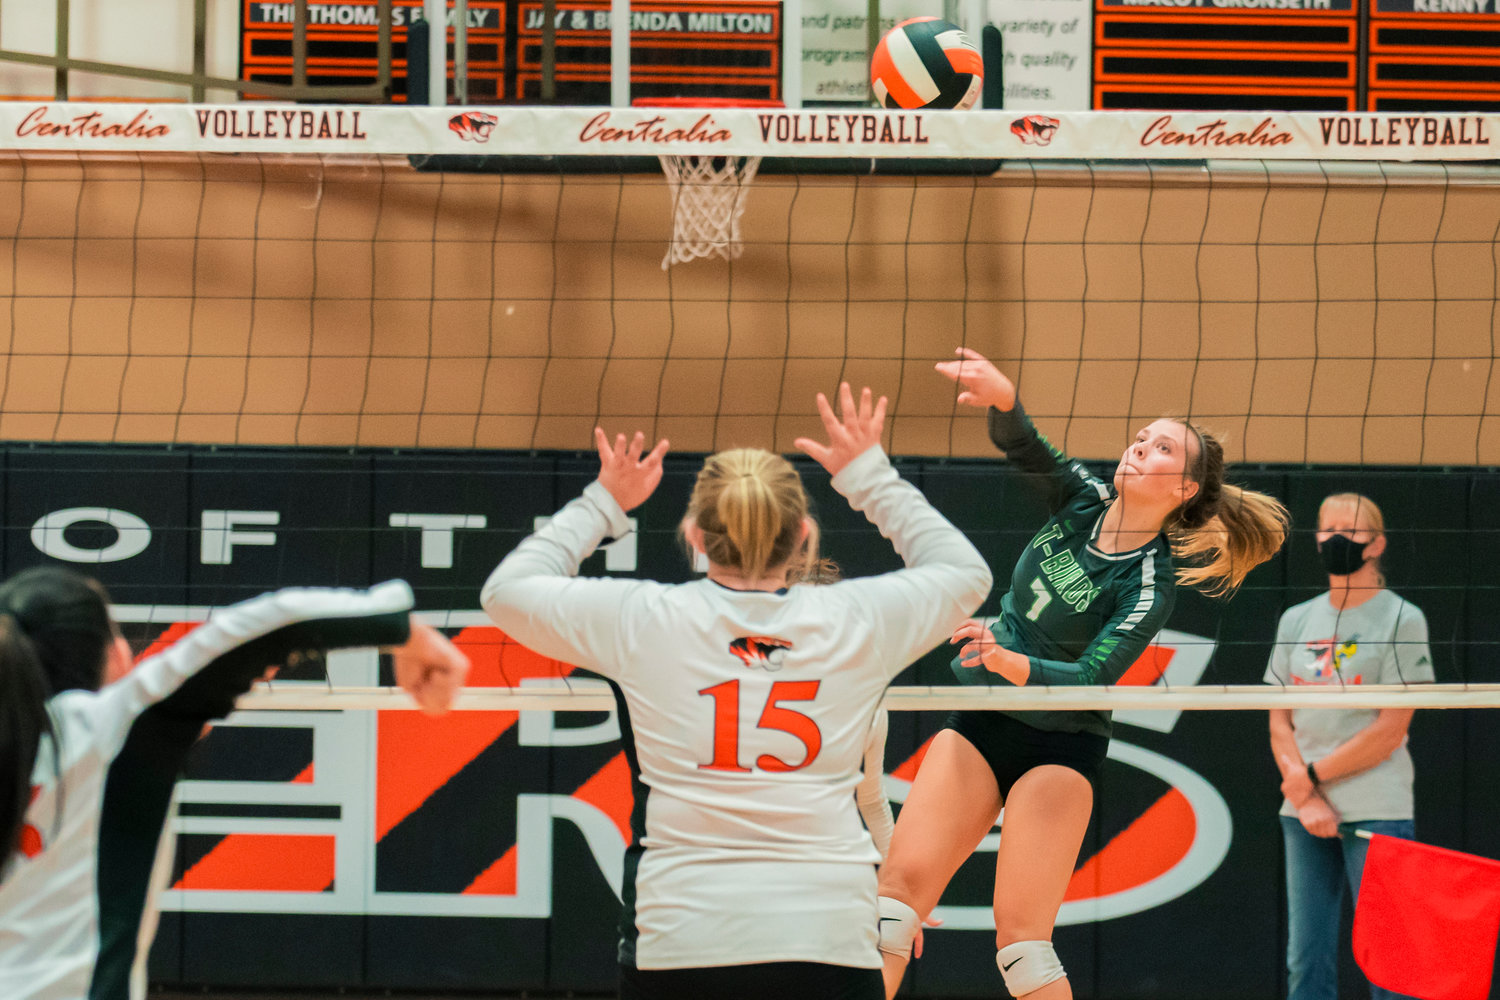 Tumwater’s Brooklynn Hayes (7) sends the ball over the net during a game against the Tigers Tuesday night in Centralia.